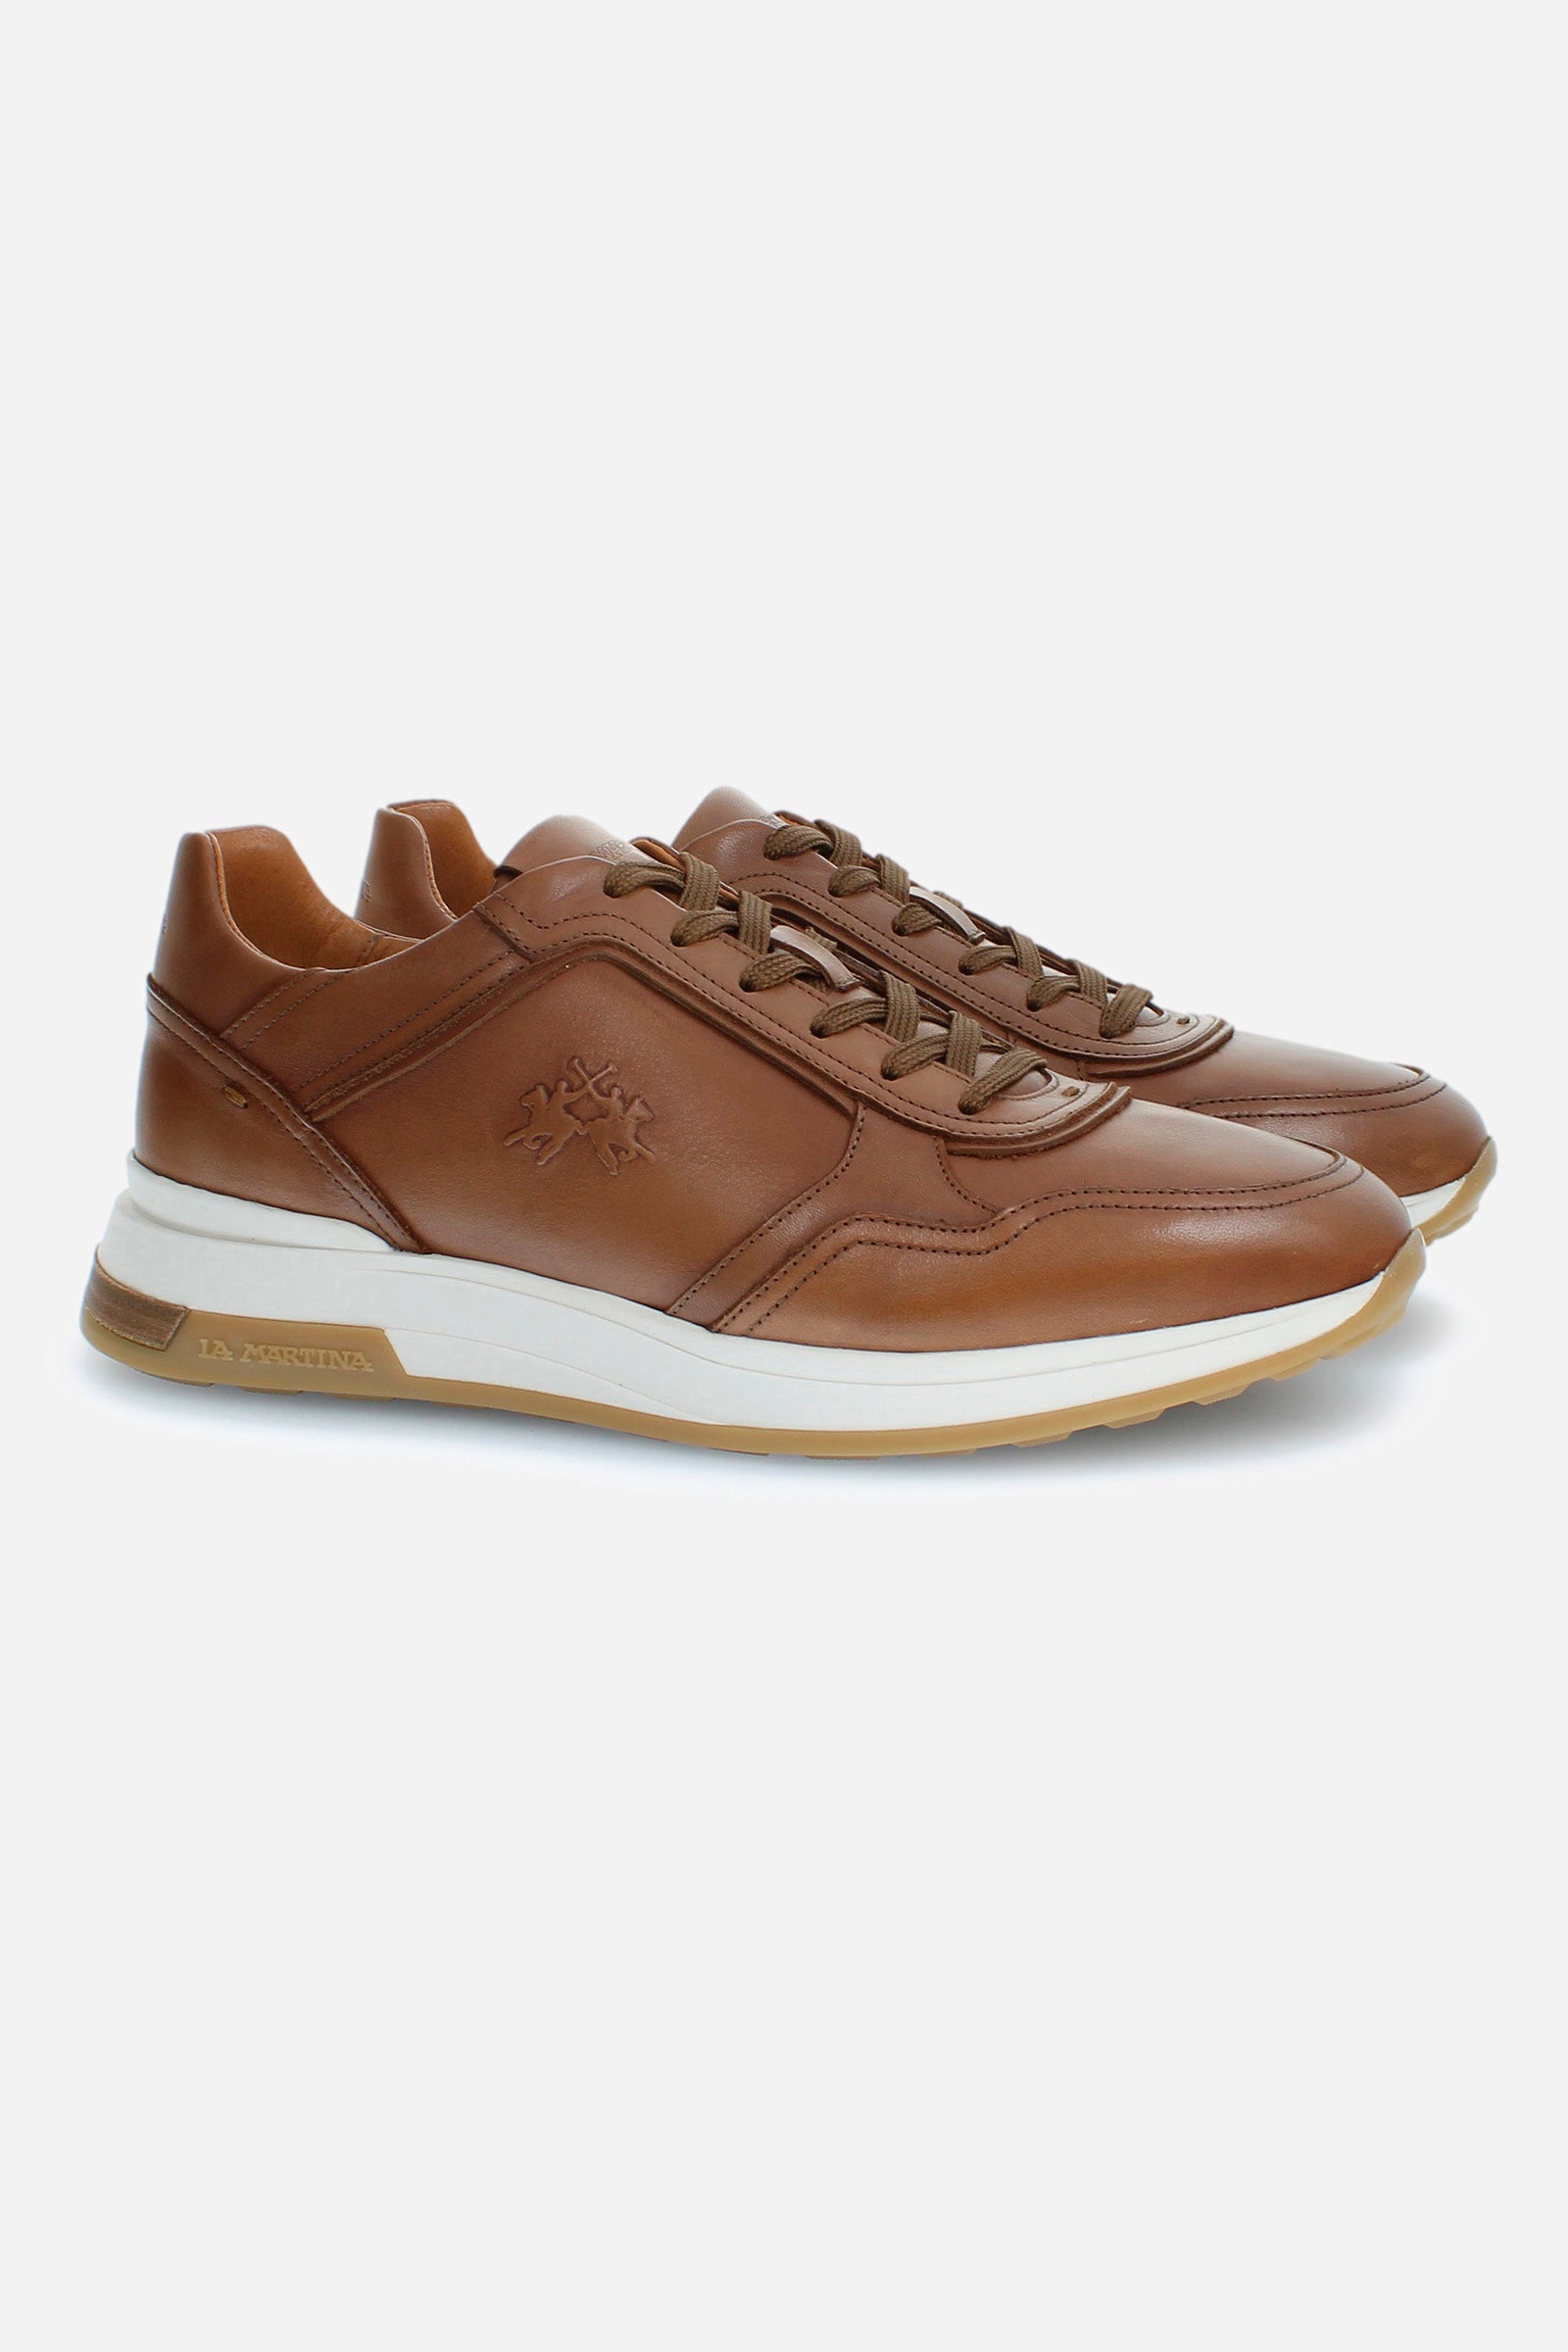 Men's trainers with raised sole